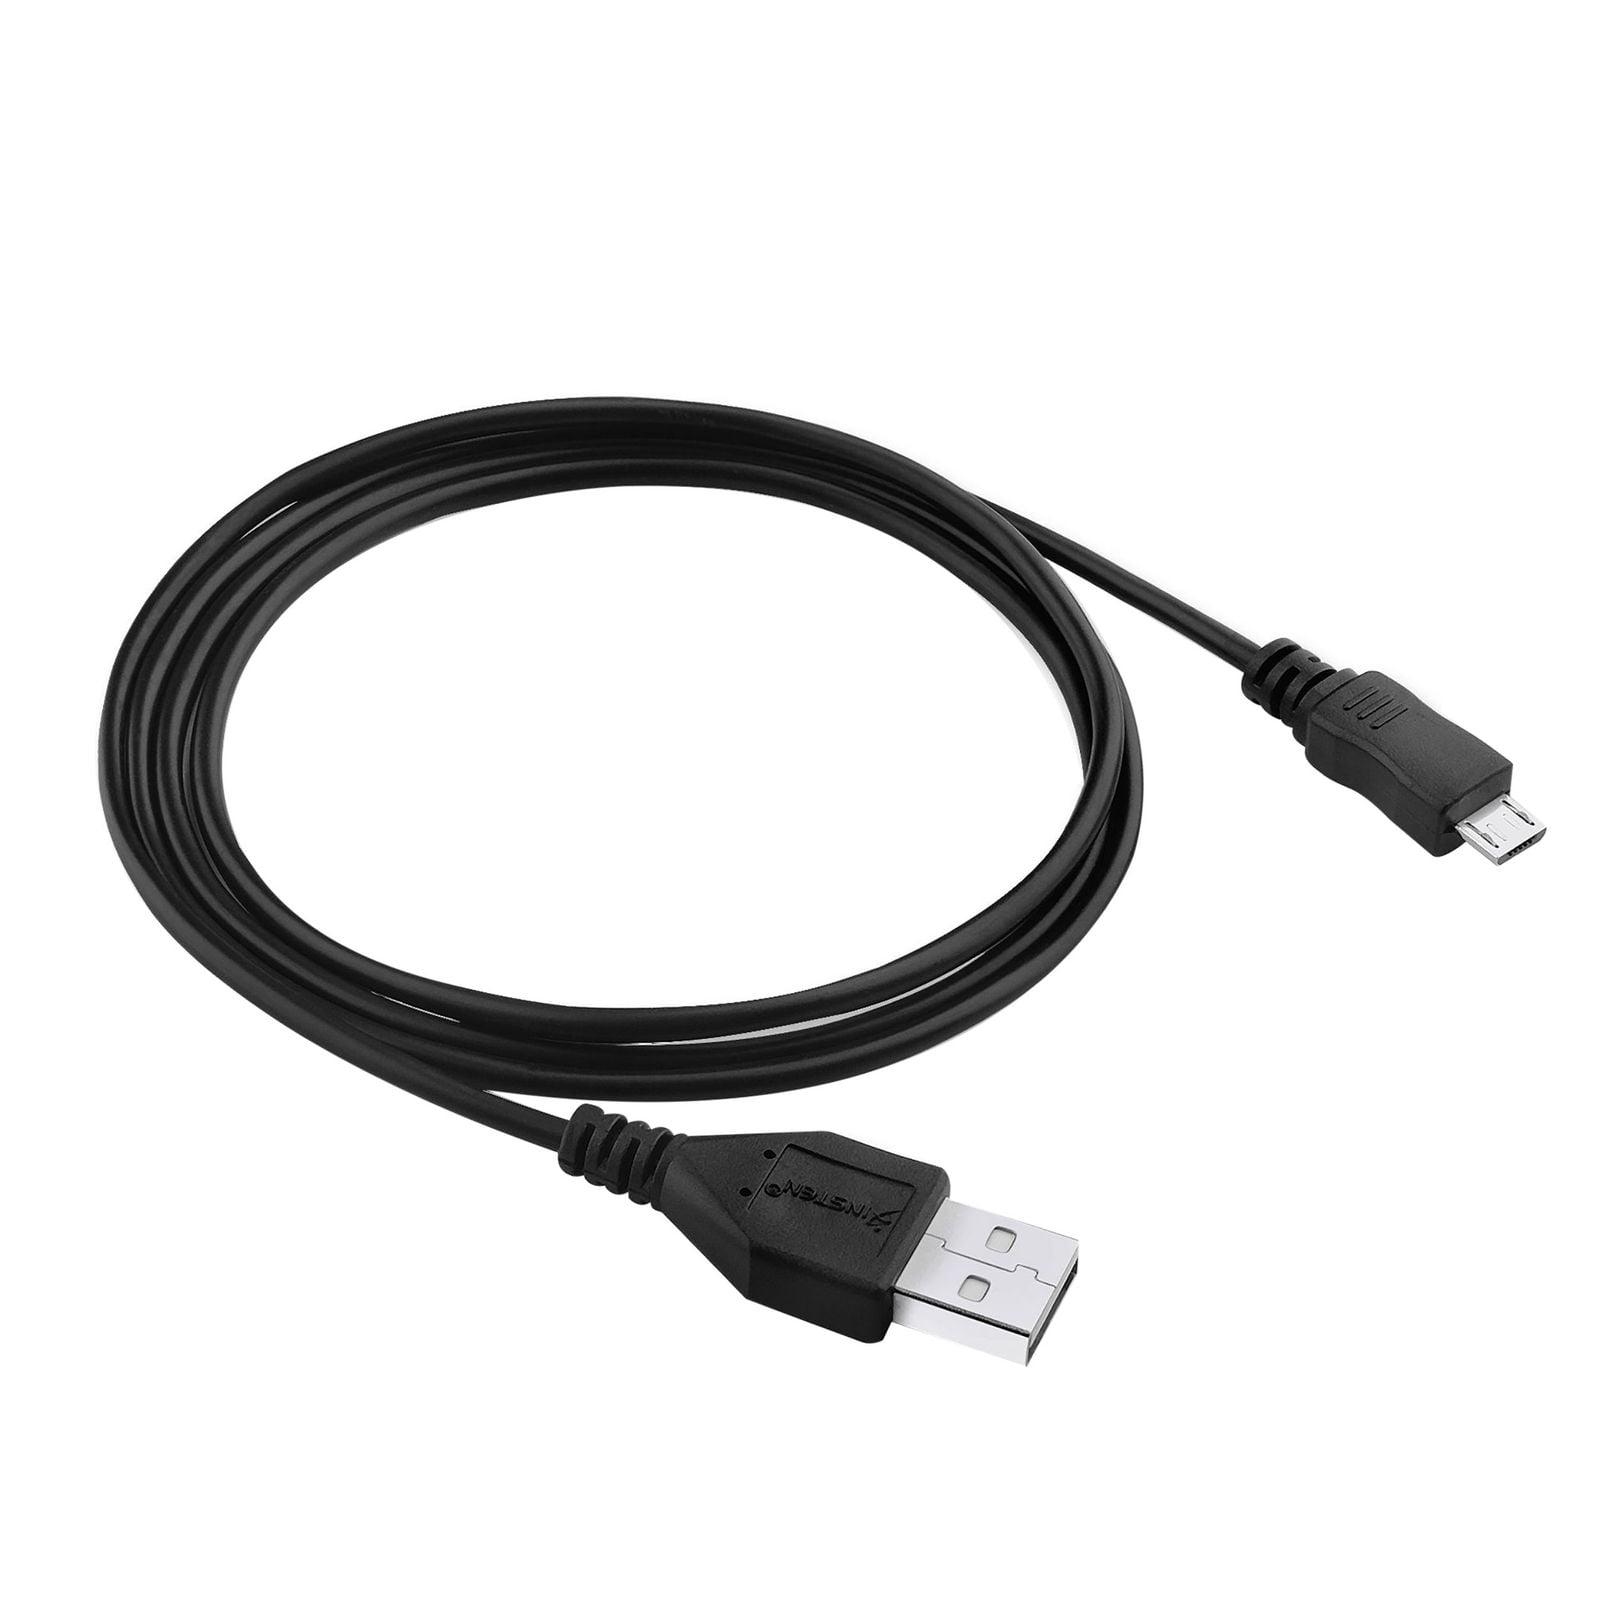 PRO OTG Power Cable Works for Alcatel OneTouch POP Icon with Power Connect to Any Compatible USB Accessory with MicroUSB 